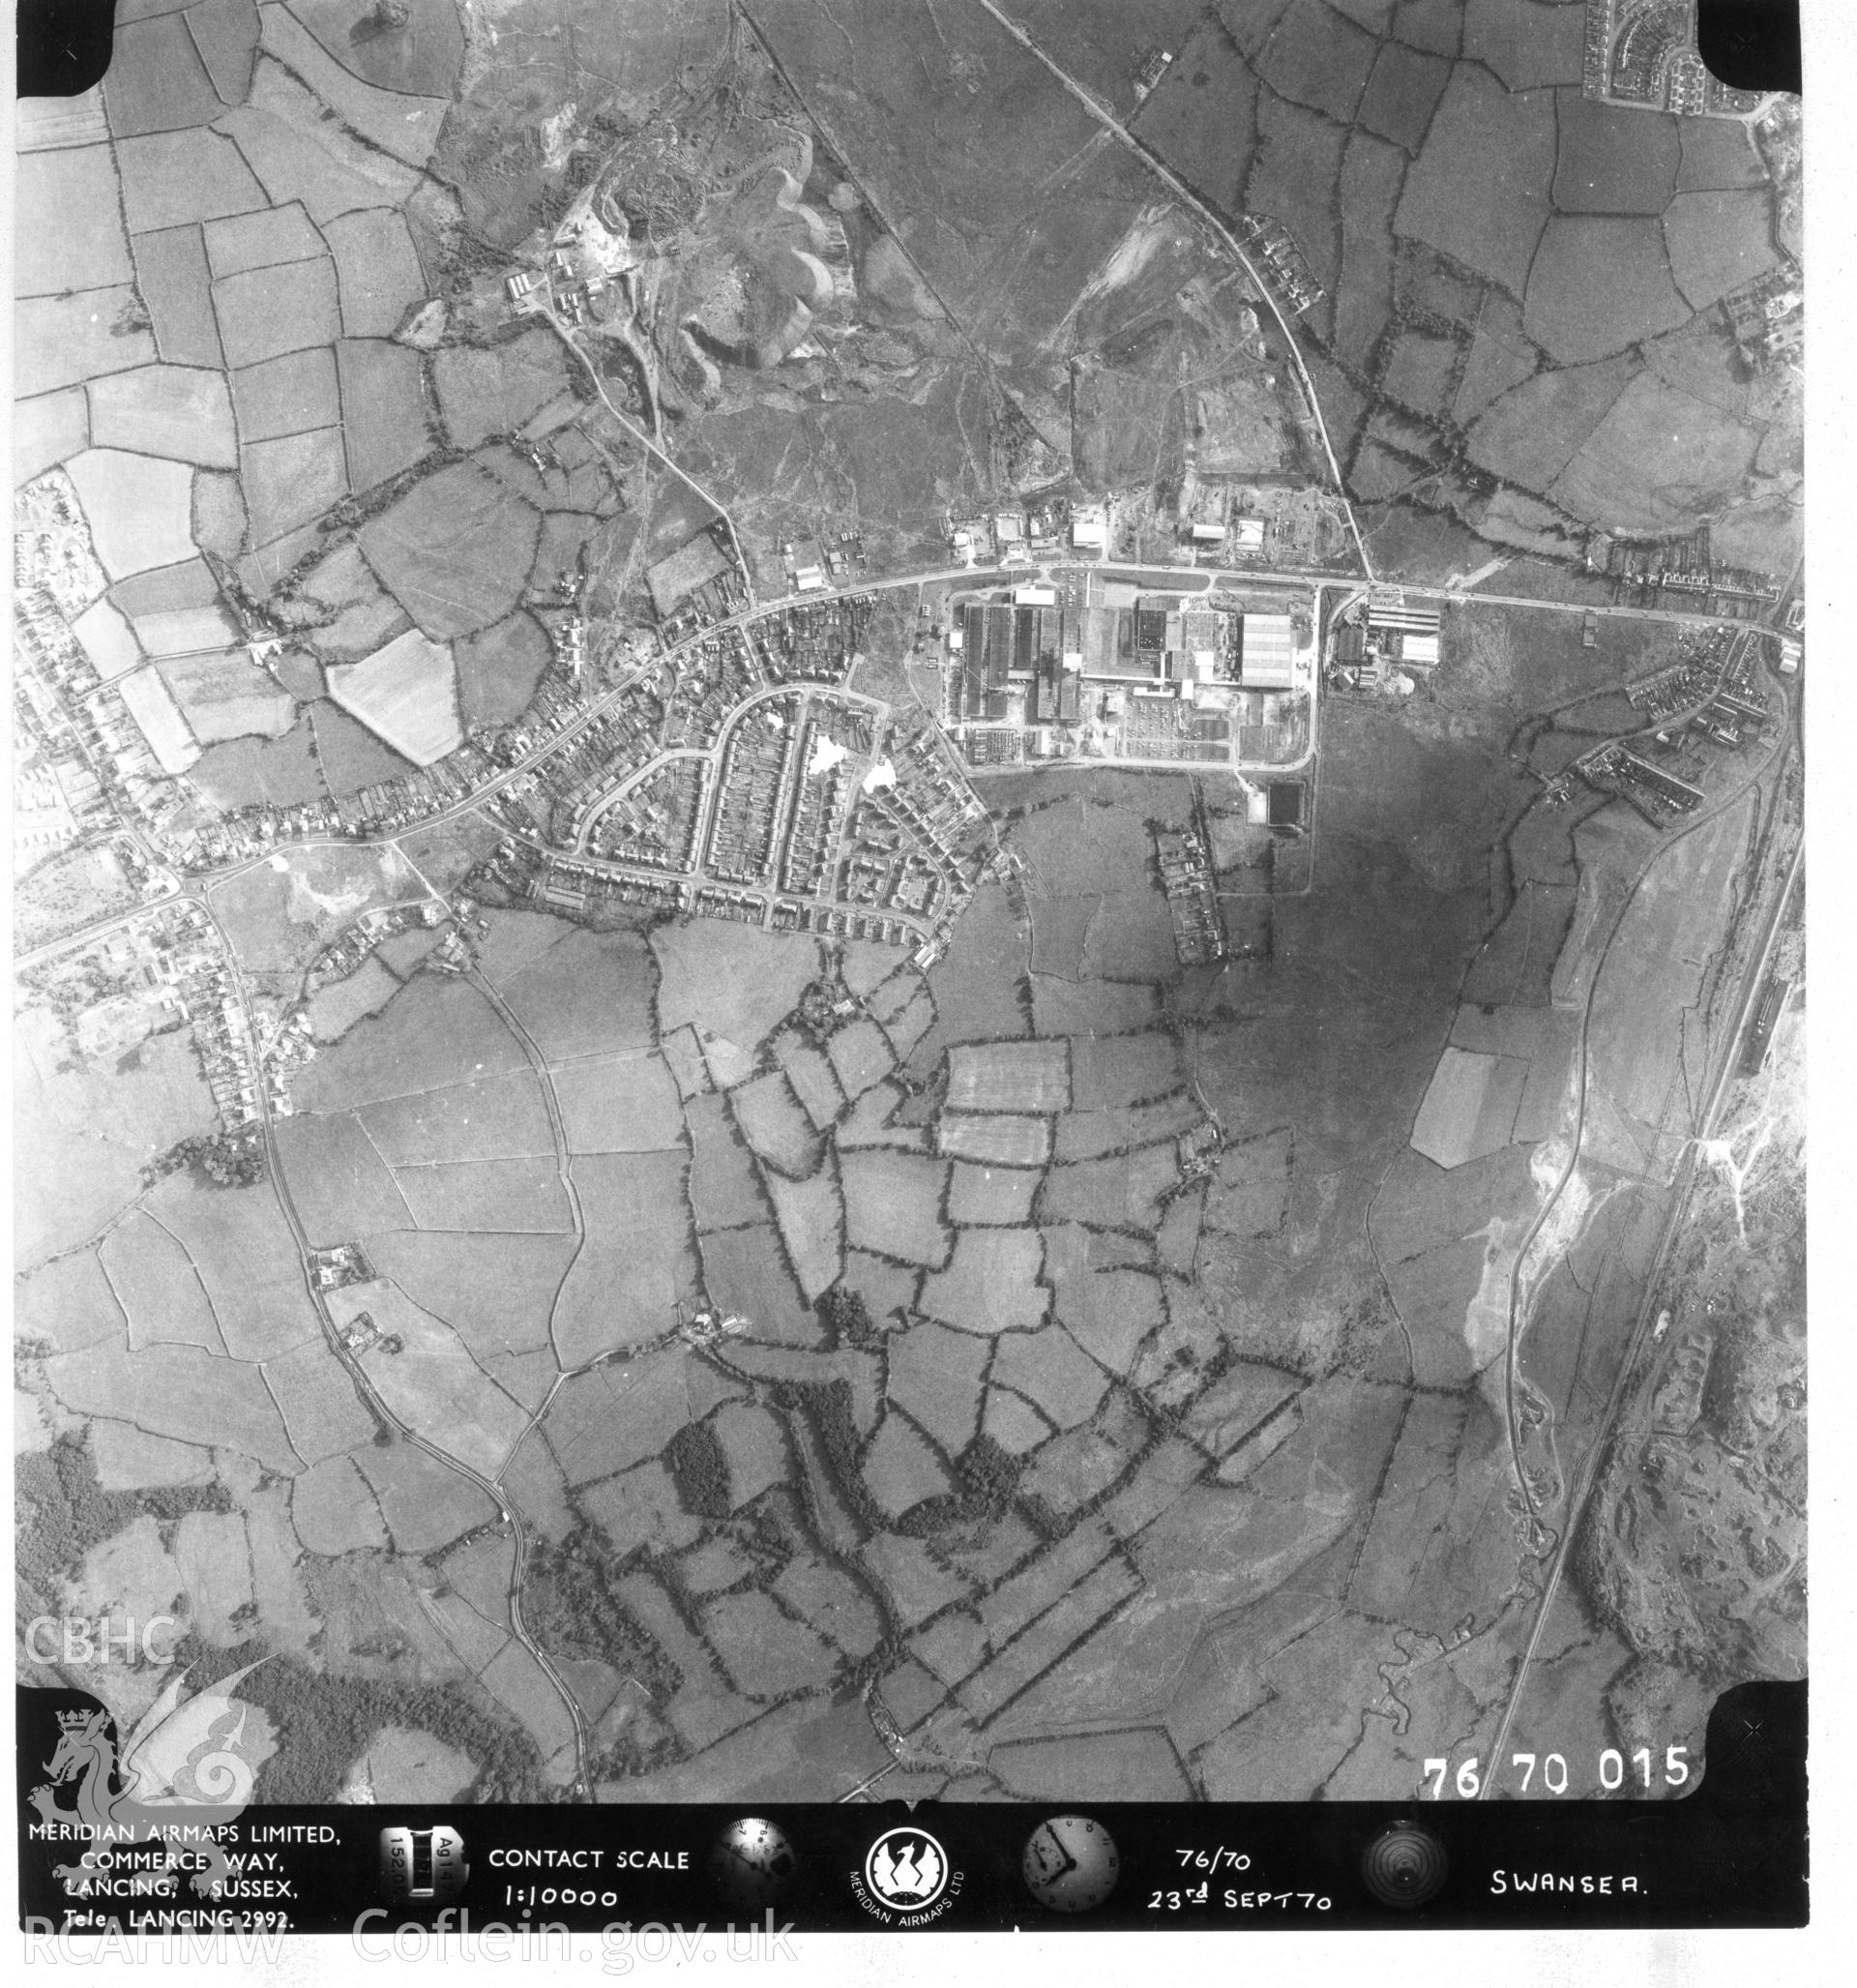 Black and white aerial photograph taken in 23rd September 1970. Part of material used in a Setting Impact Assessment of Land off Phoenix Way, Garngoch Business Village, Swansea, carried out by Archaeology Wales, 2018. Project number P2631.